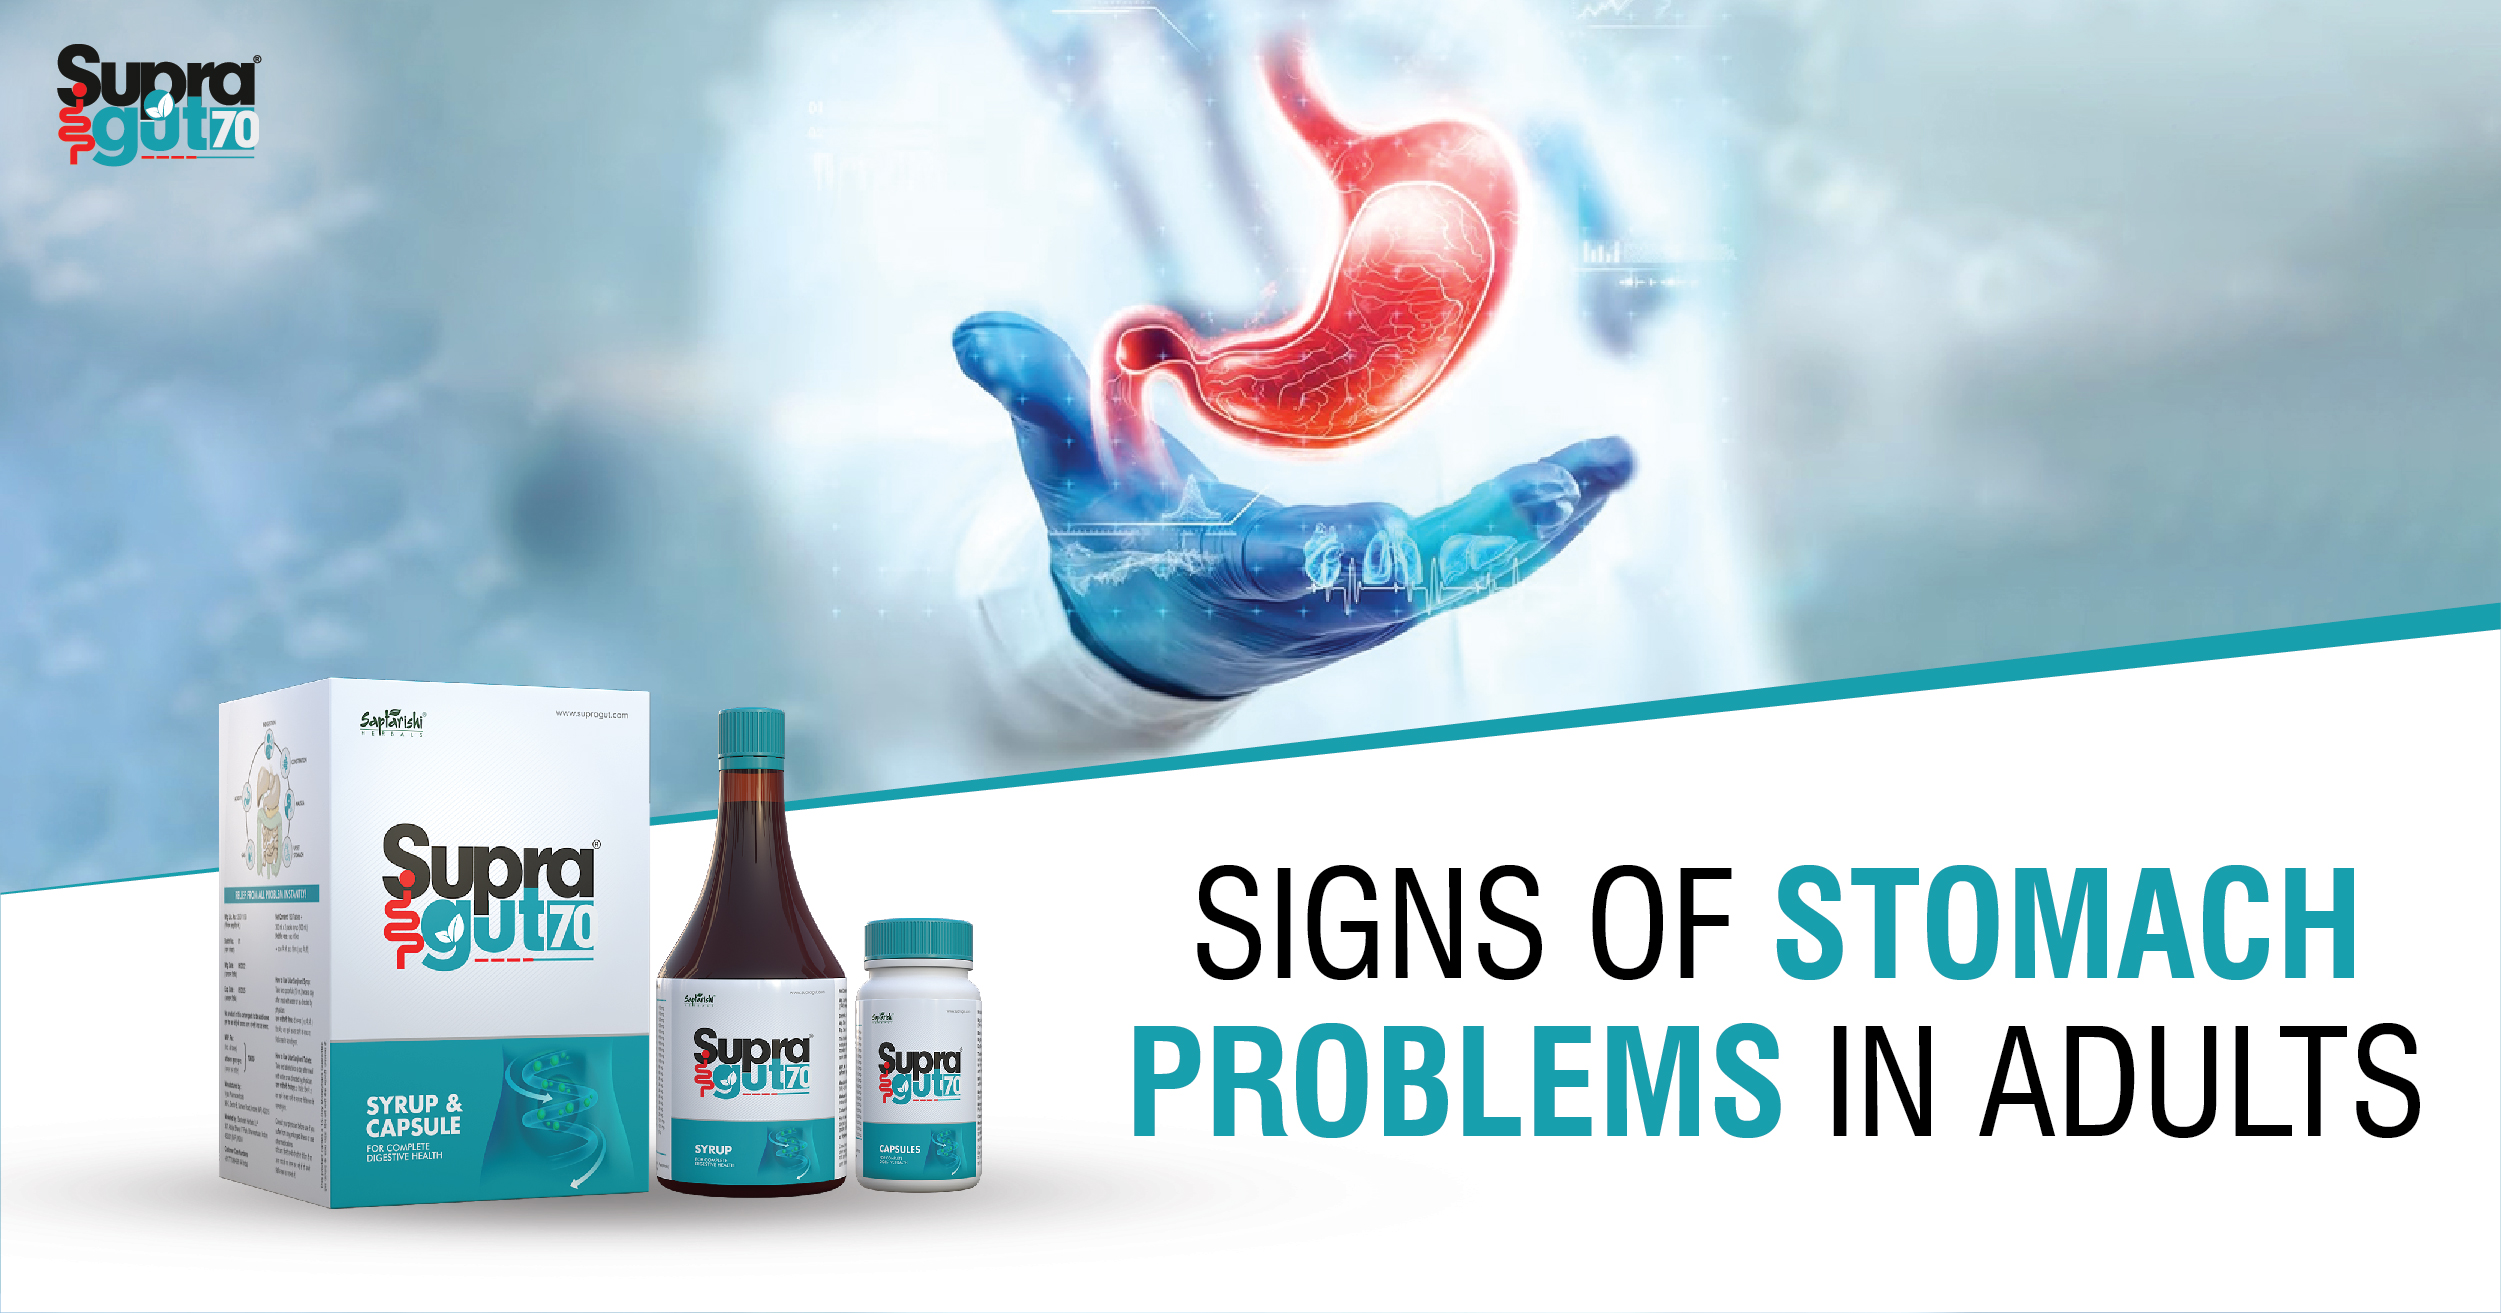 Signs of Stomach Problems in Adults